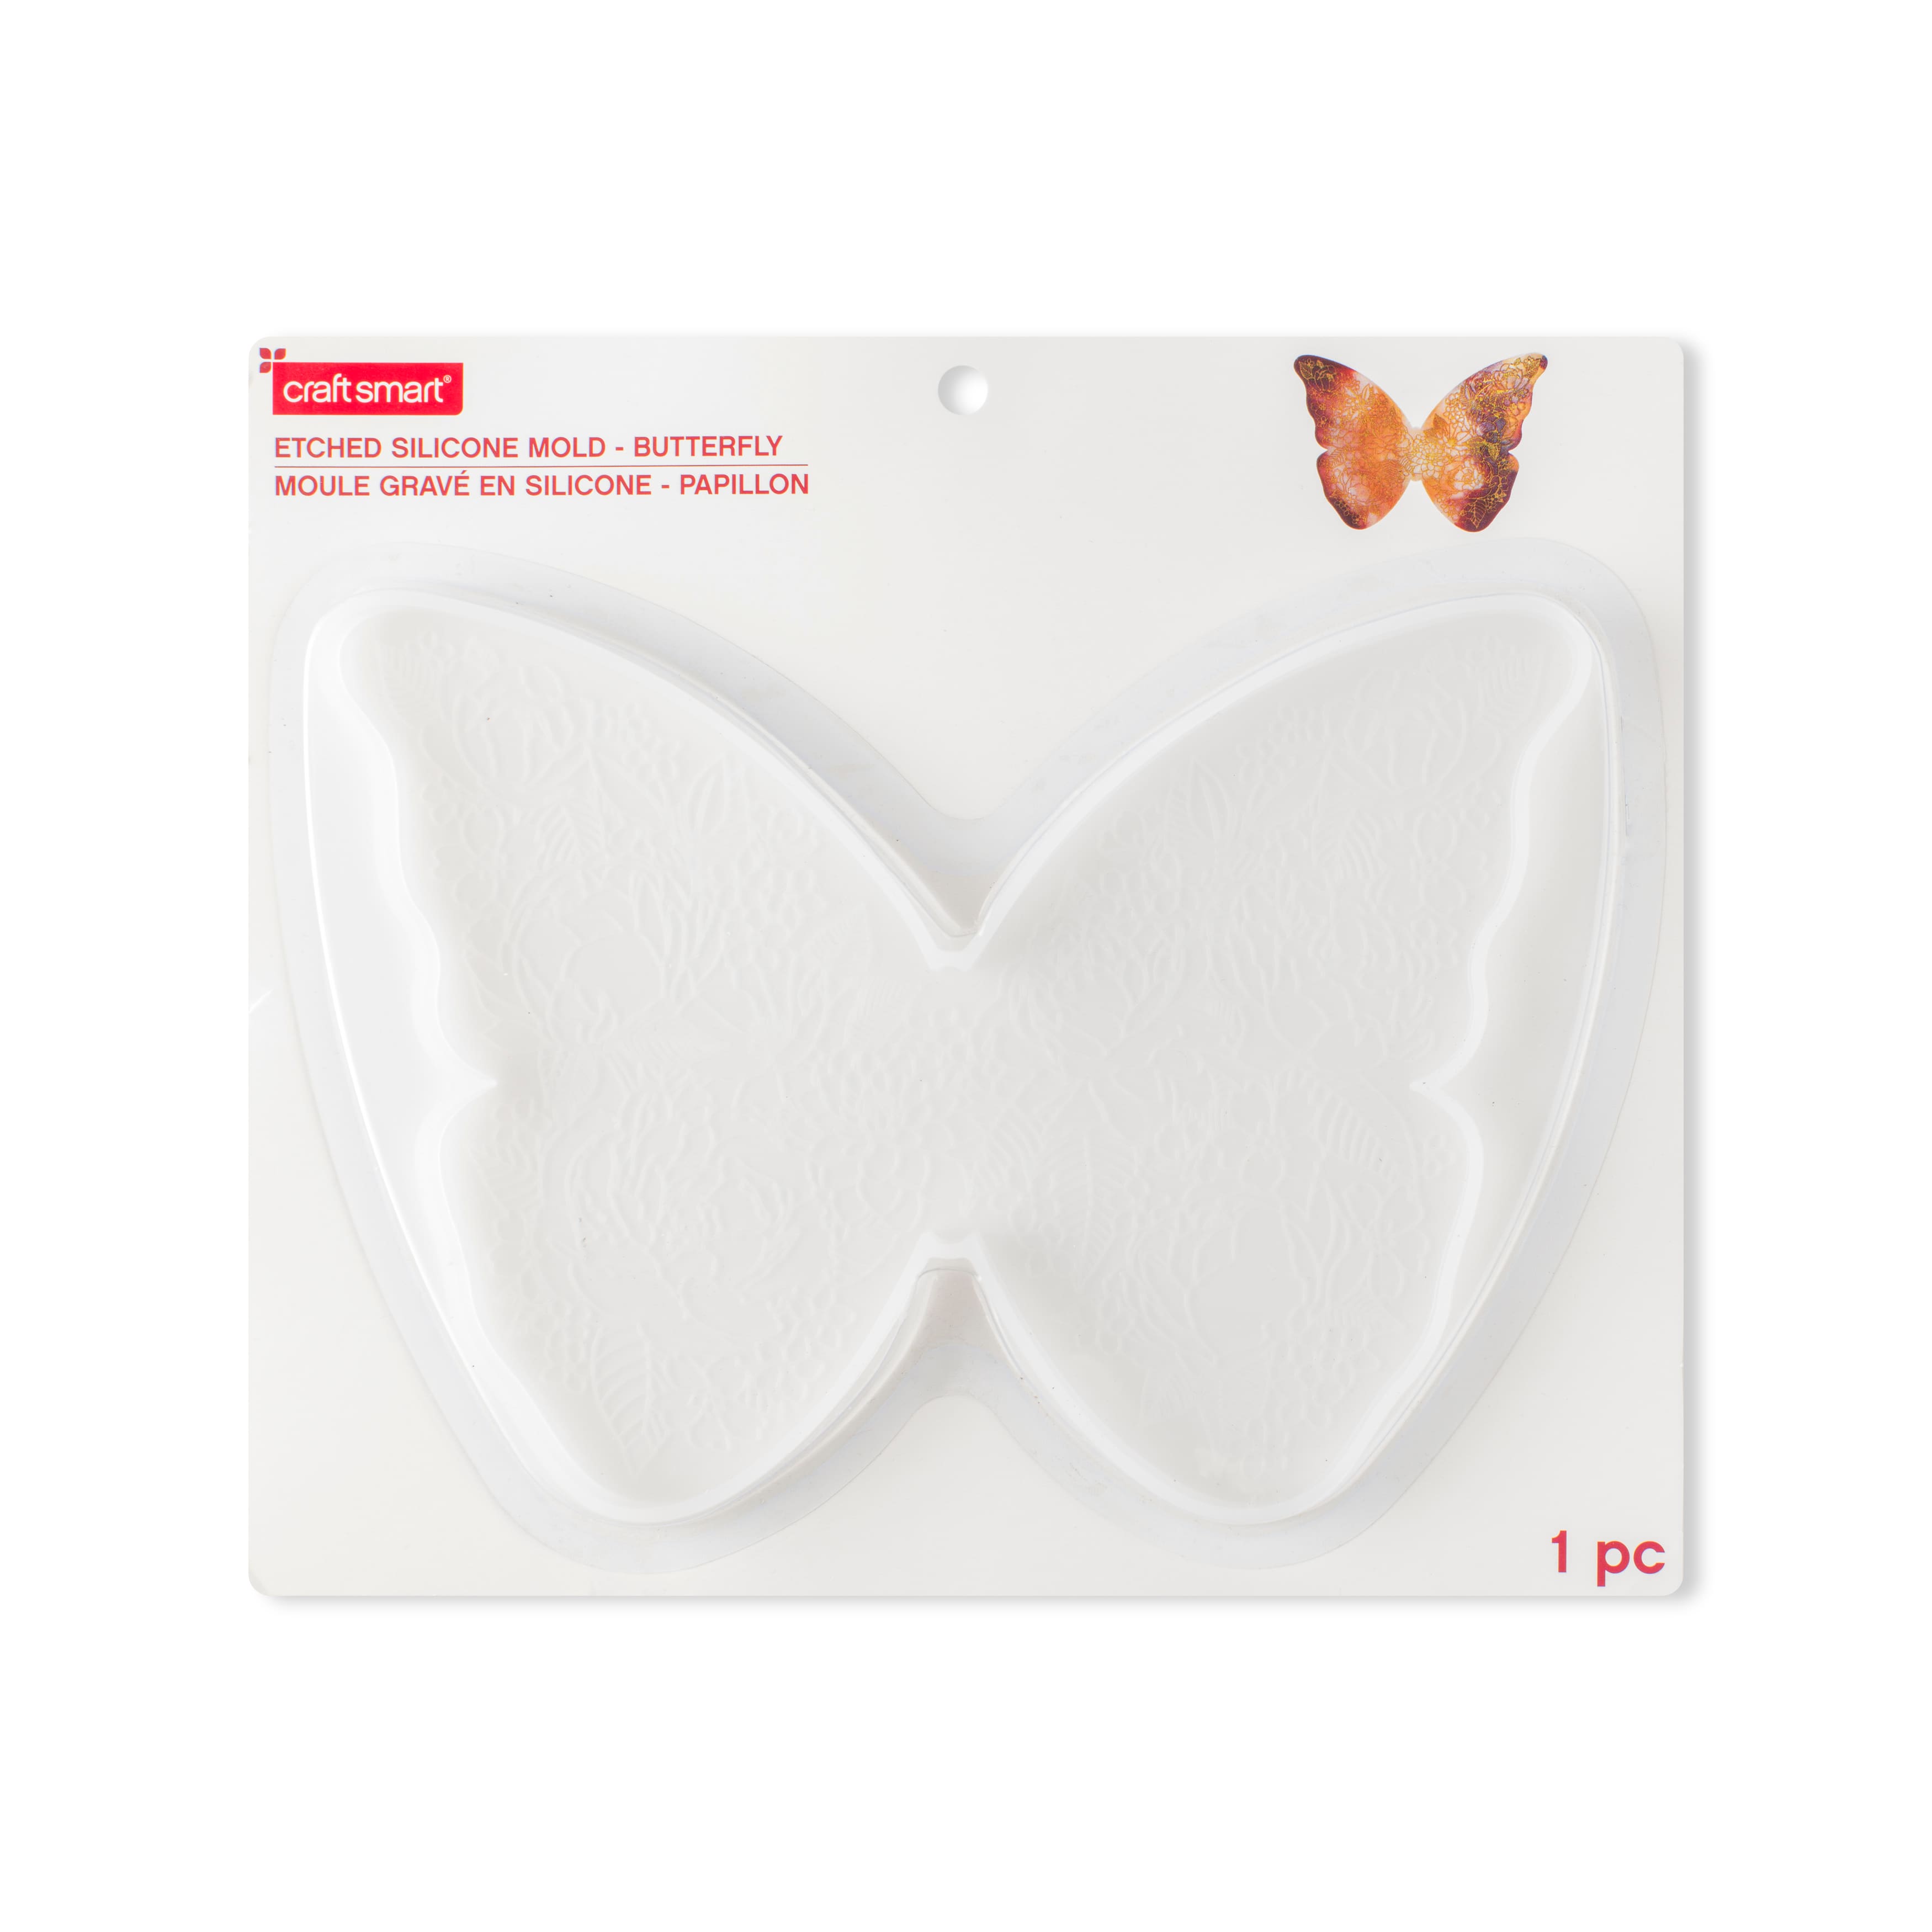 Butterfly Etched Silicone Mold by Craft Smart&#xAE;